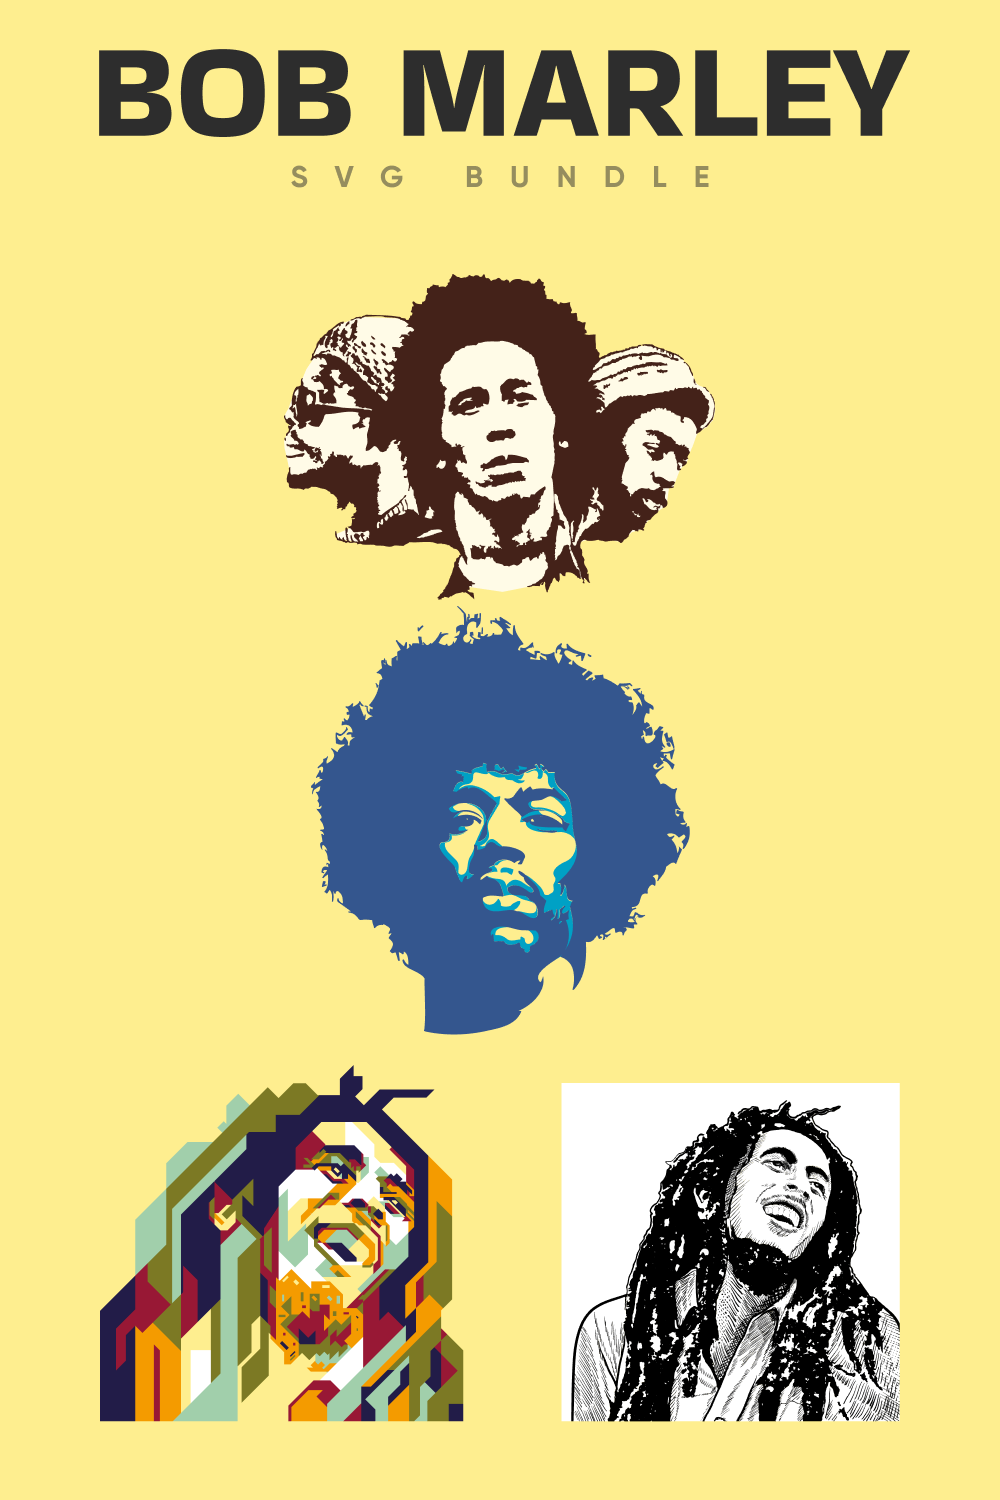 Creative pop art illustration with Bob Marley in the different periods of his life.